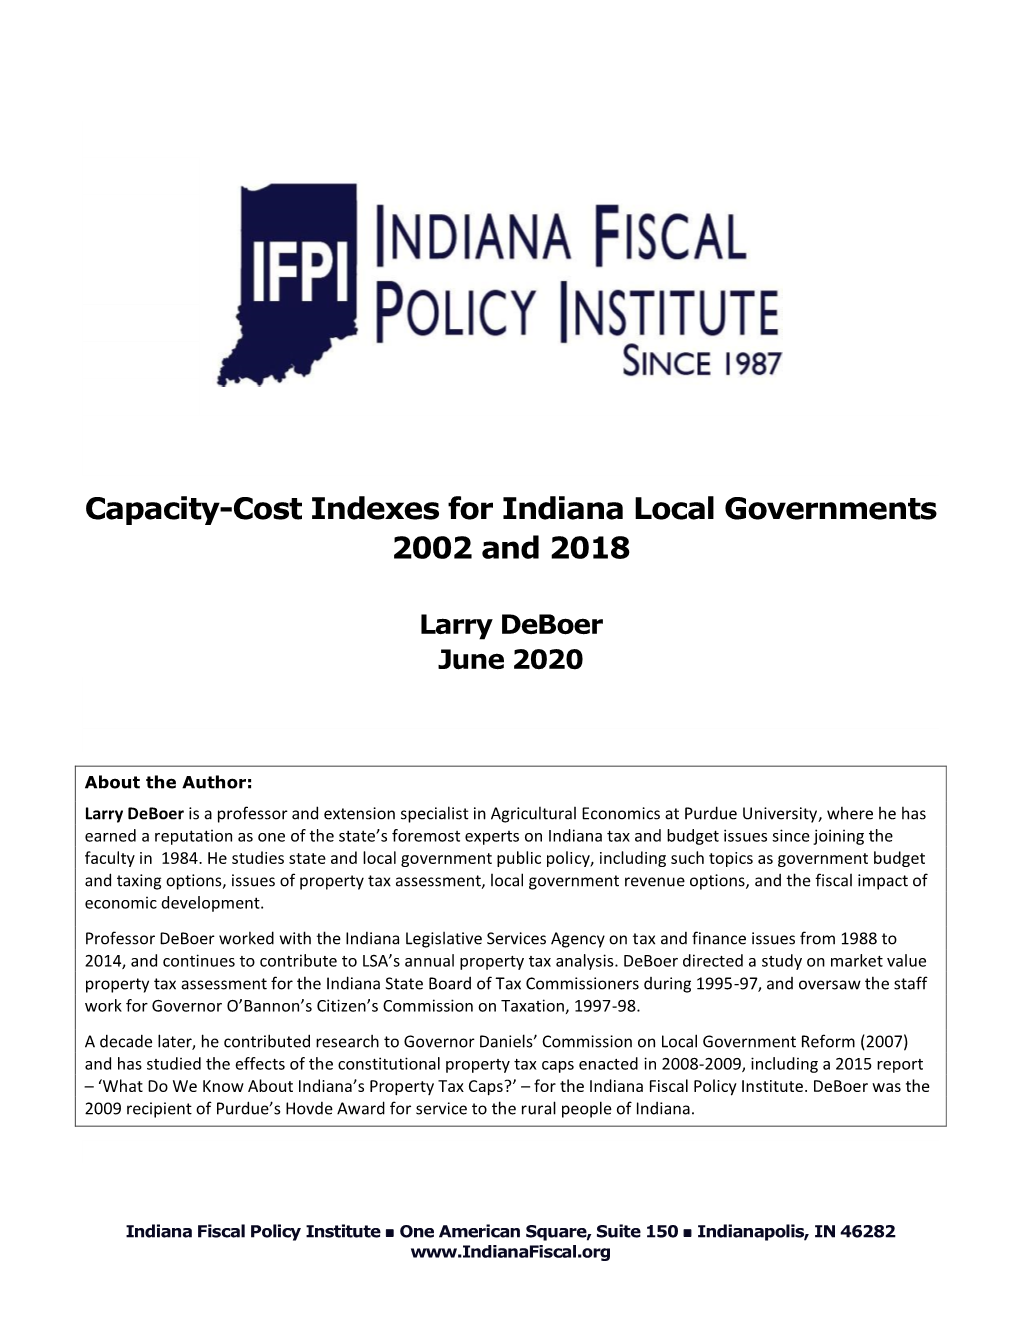 Capacity-Cost Indexes for Indiana Local Governments 2002 and 2018